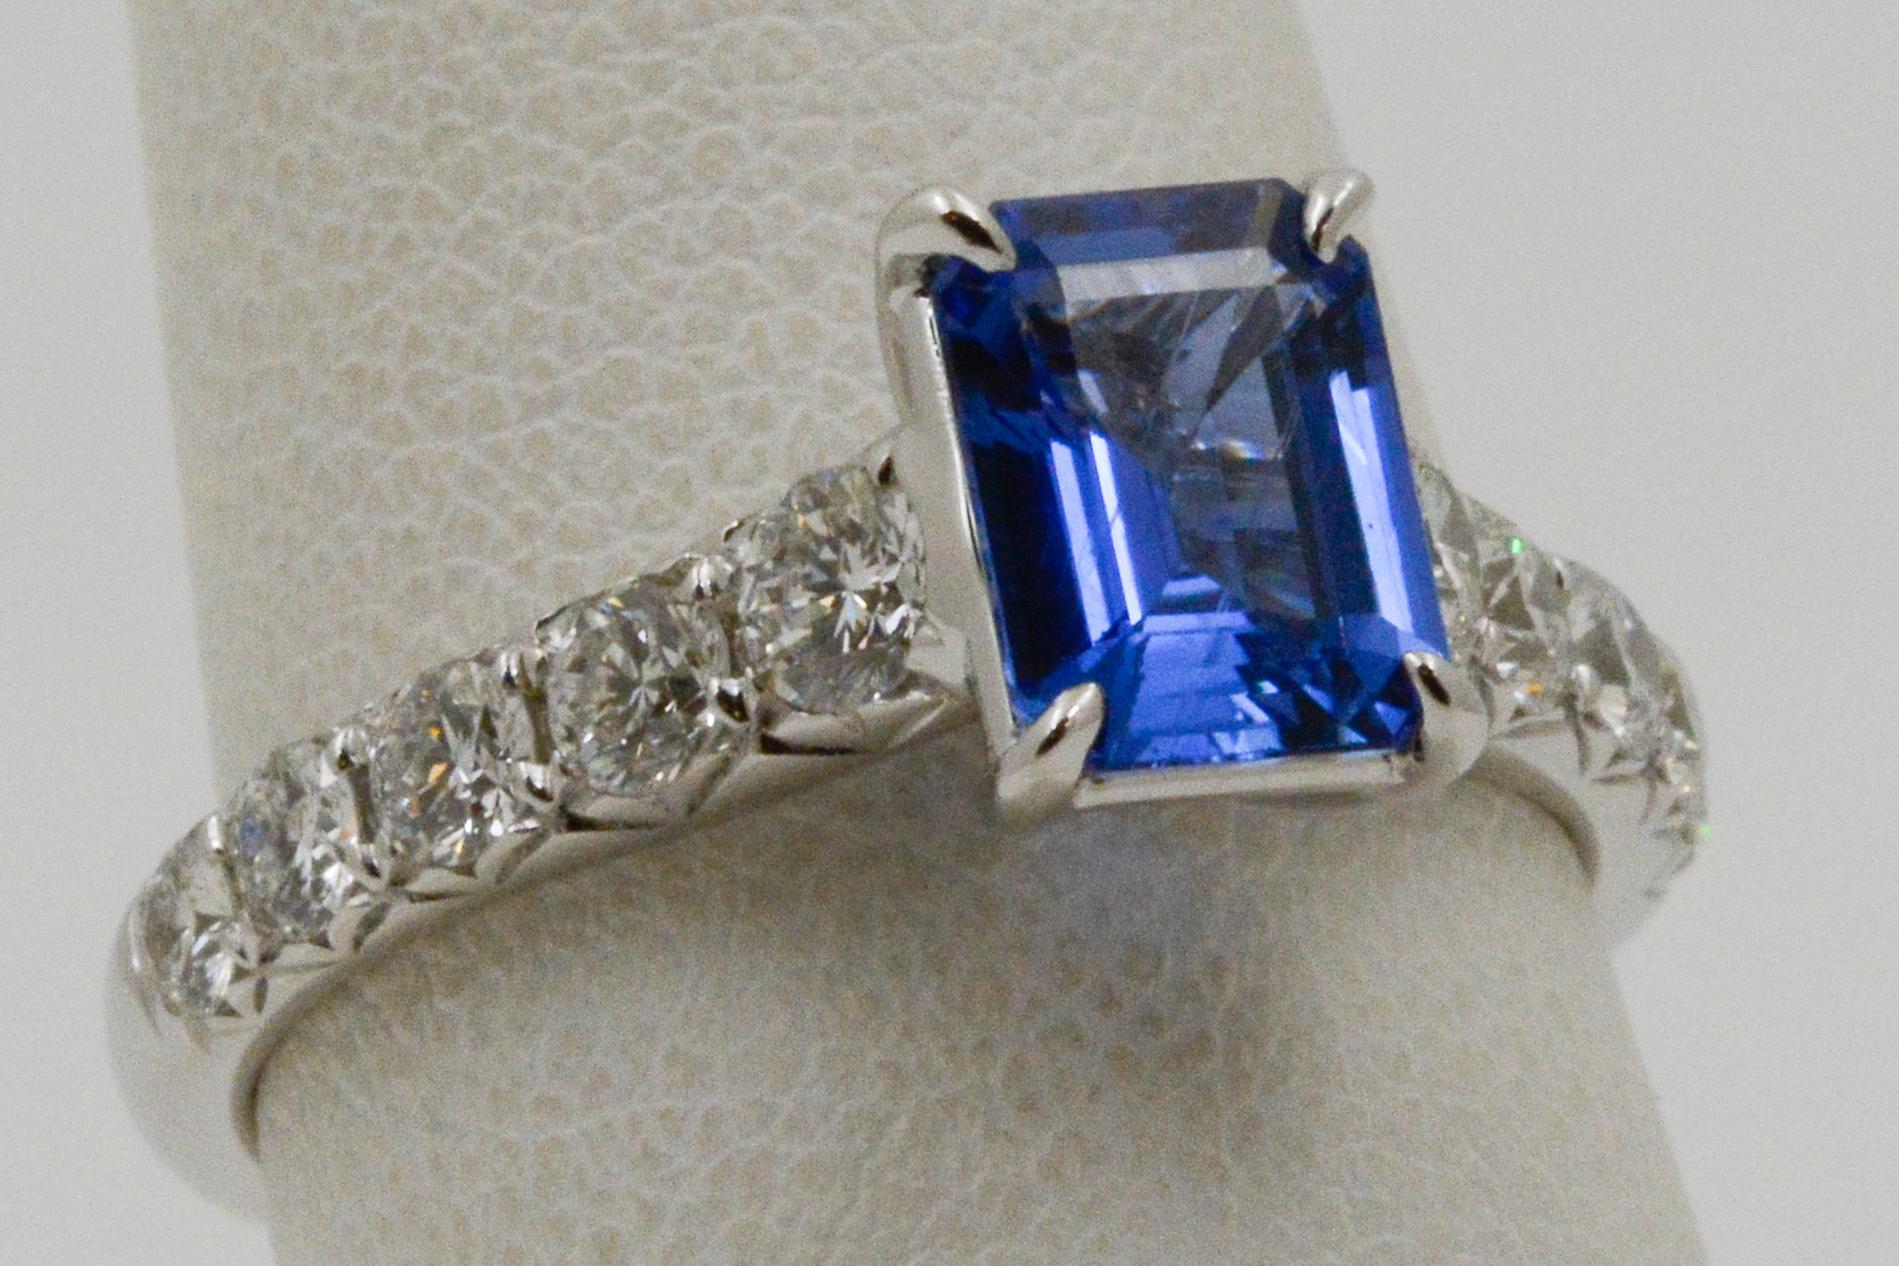 This 18 karat white gold Point of Love ring features a Ceylon blue sapphire weighing 1.57 carats. The ring also showcases 10 round brilliant cut diamonds weighing 0.76 carats. 